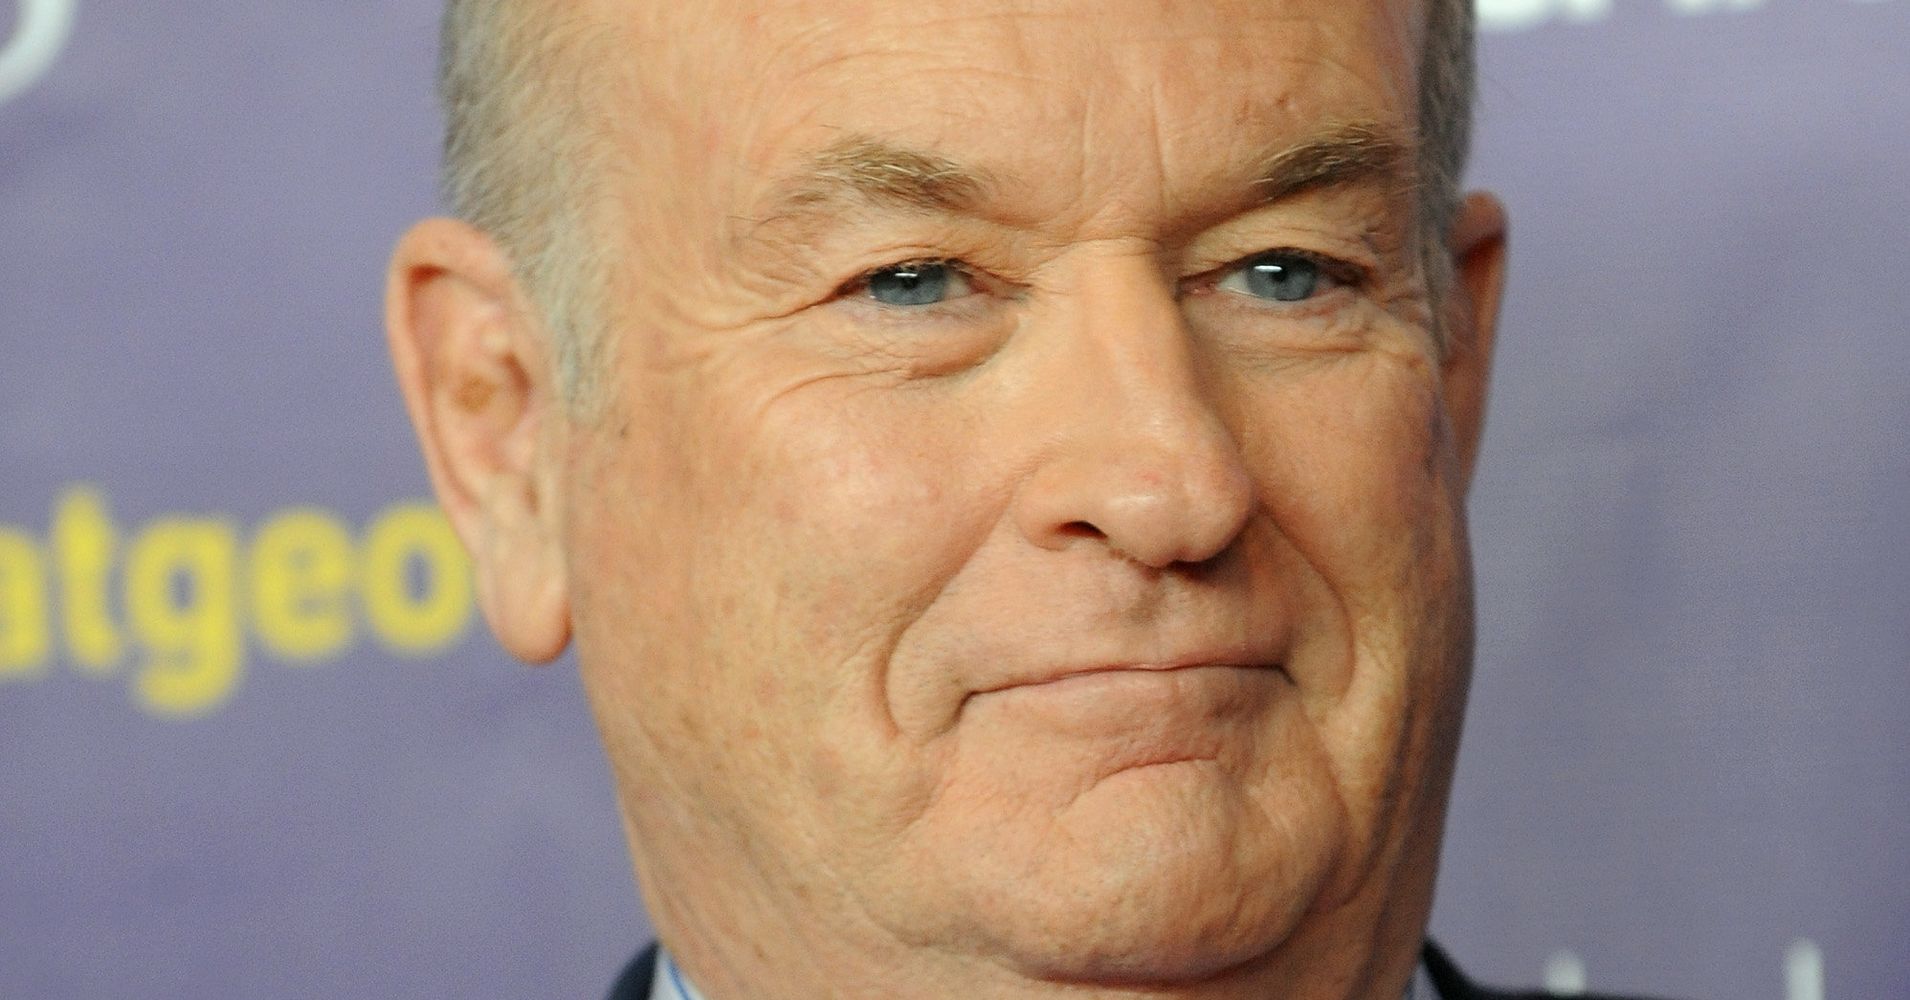 Bill O'Reilly May Be Off Television, But He Still Has The Mic | HuffPost1910 x 1000